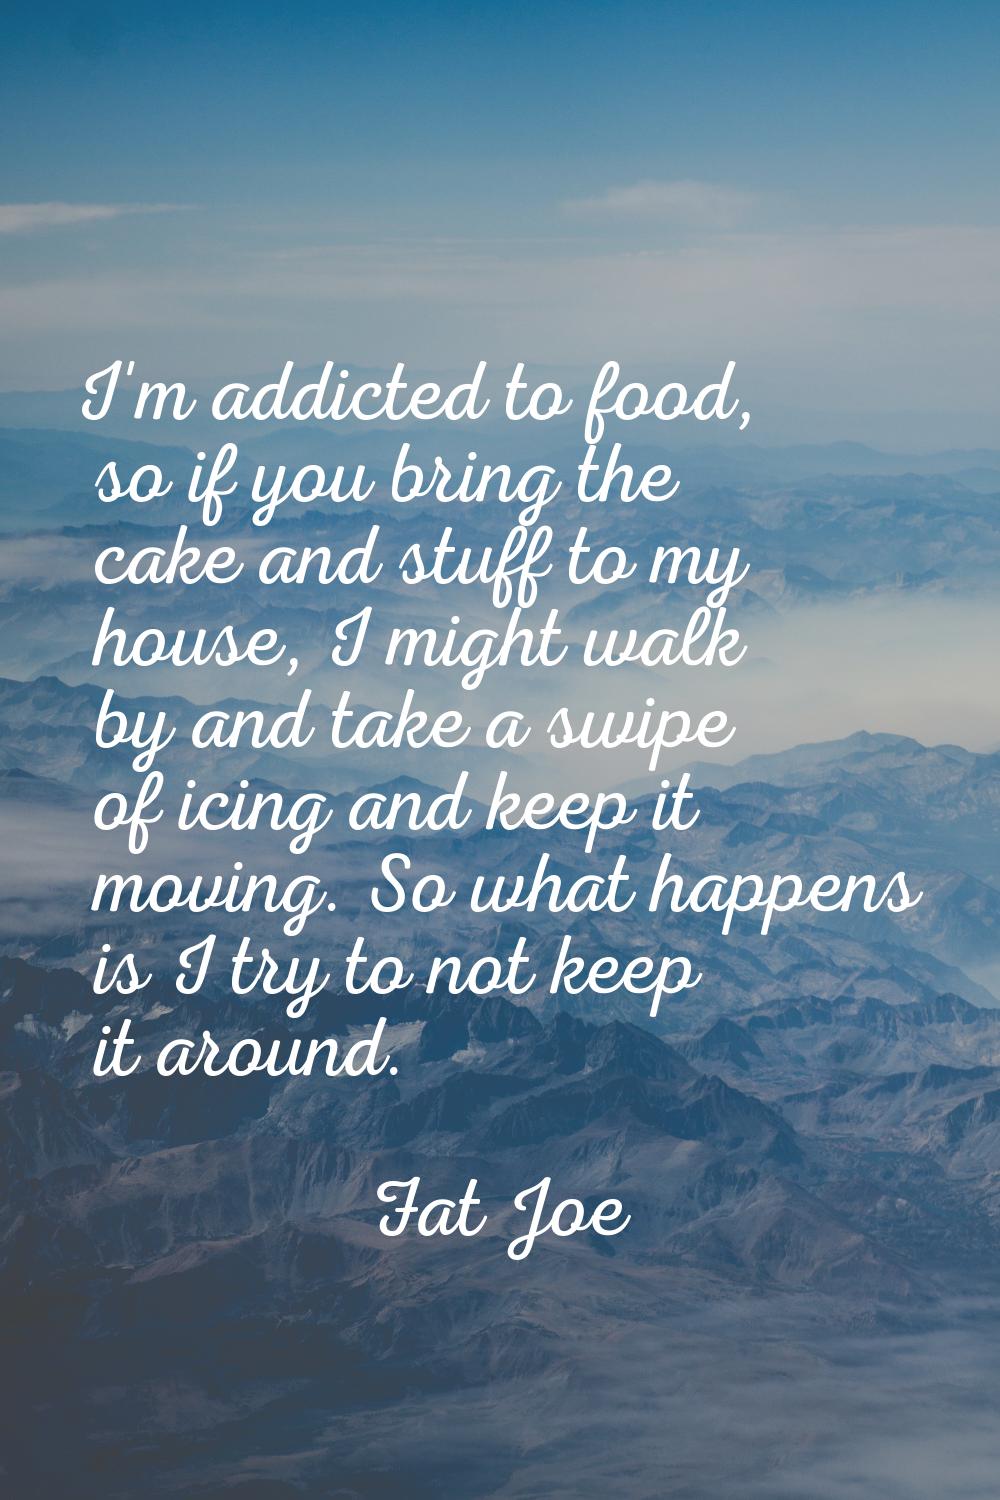 I'm addicted to food, so if you bring the cake and stuff to my house, I might walk by and take a sw